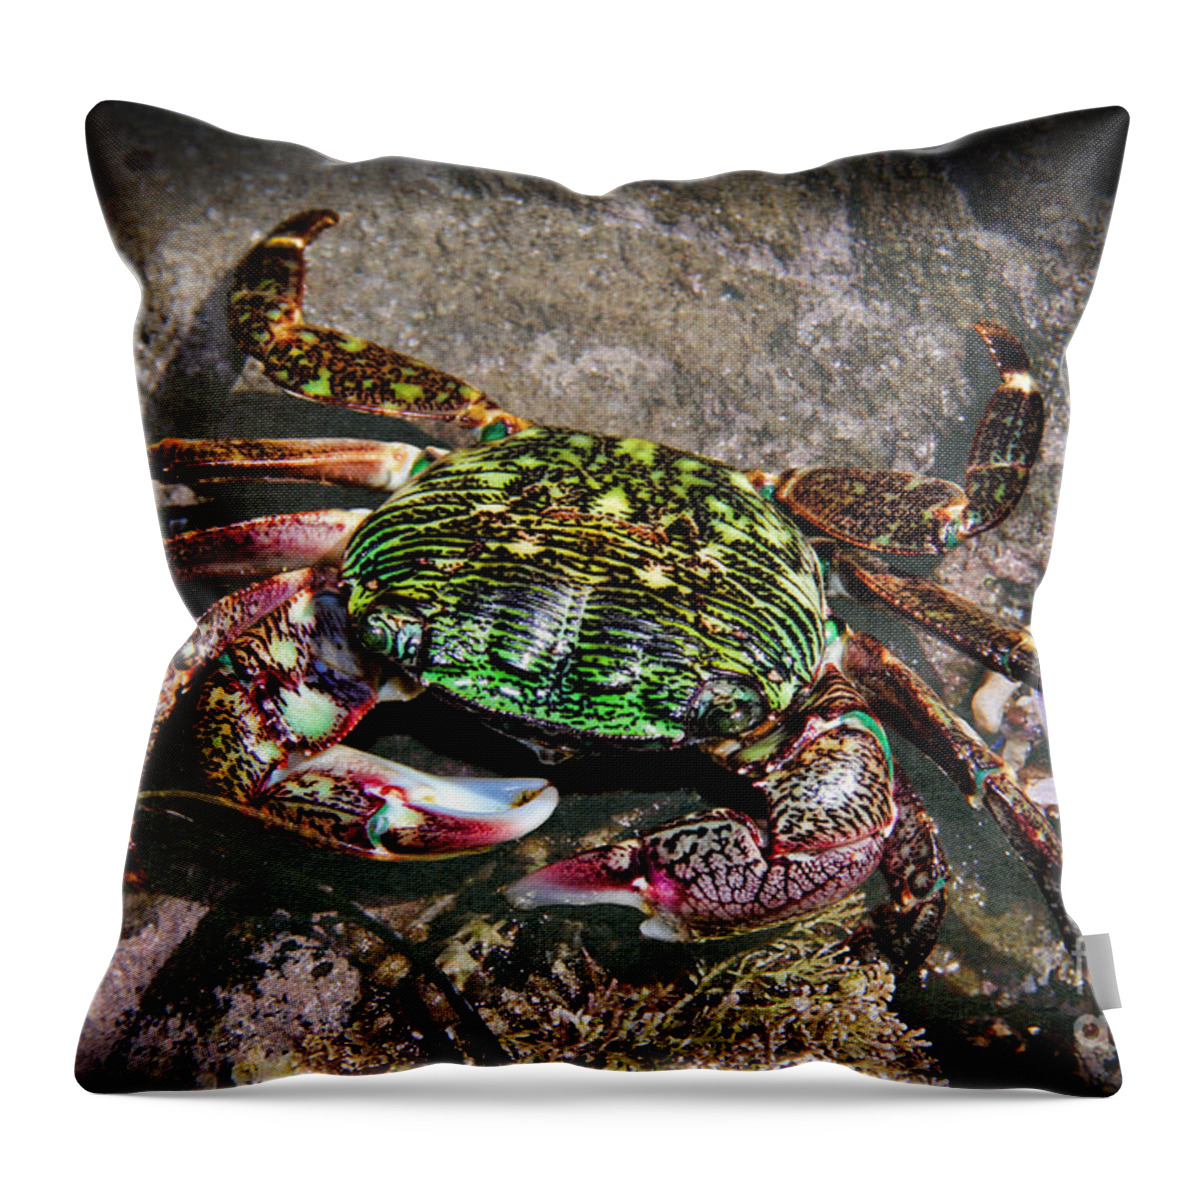 Rainbow Crab Throw Pillow featuring the photograph Rainbow Crab by Mariola Bitner